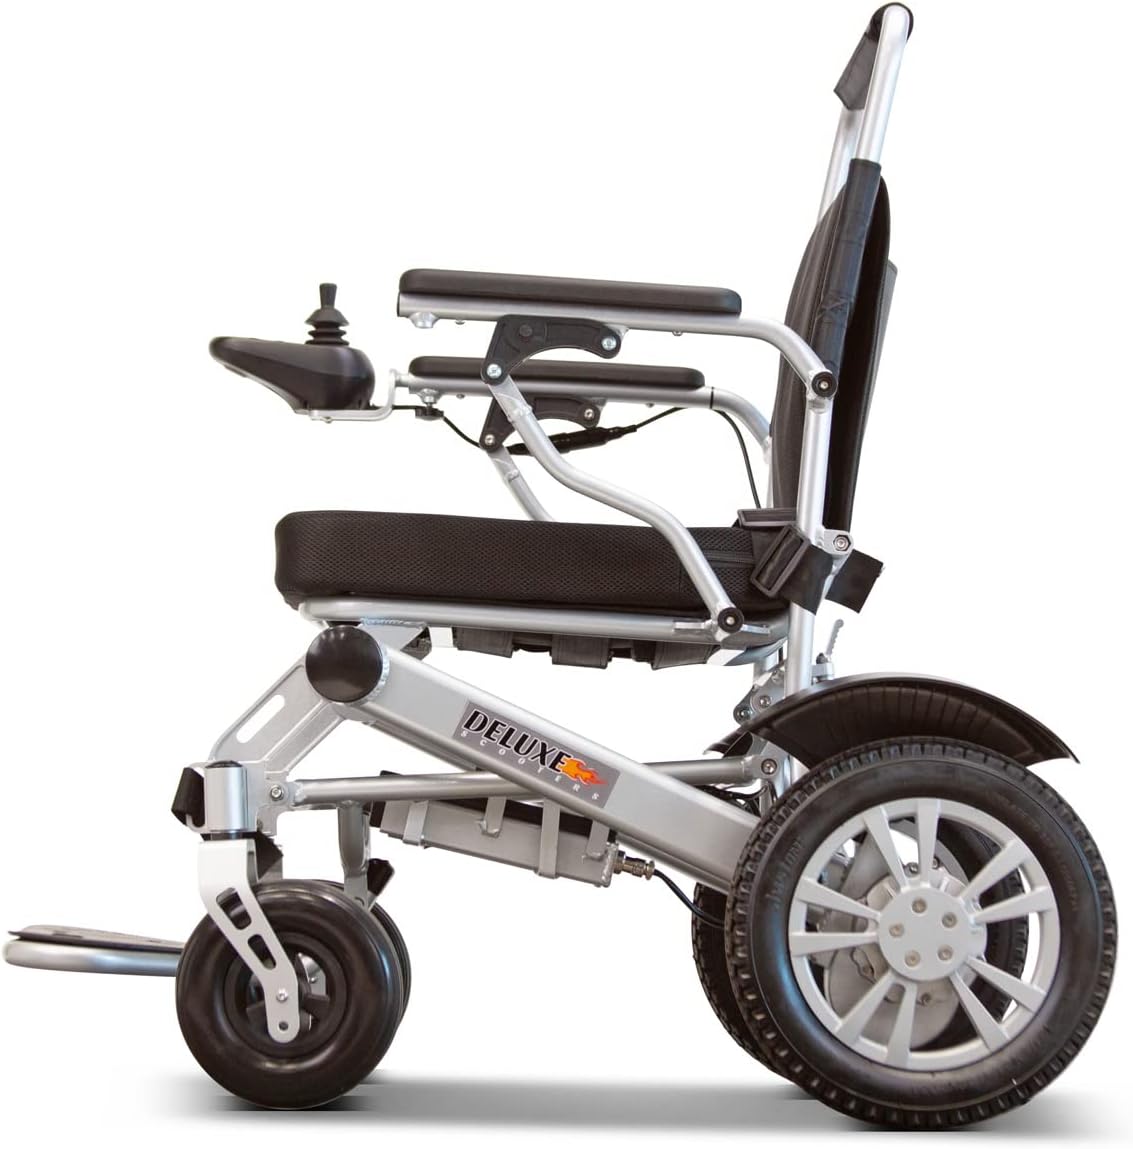 Wheelchair - 400 Pound Capacity Deluxe Scooters HD Long Range Lightweight Foldable Electric Wheelchair, Portable, Brushless Powerful Motors, Dual Battery, All Terrain (Silver)